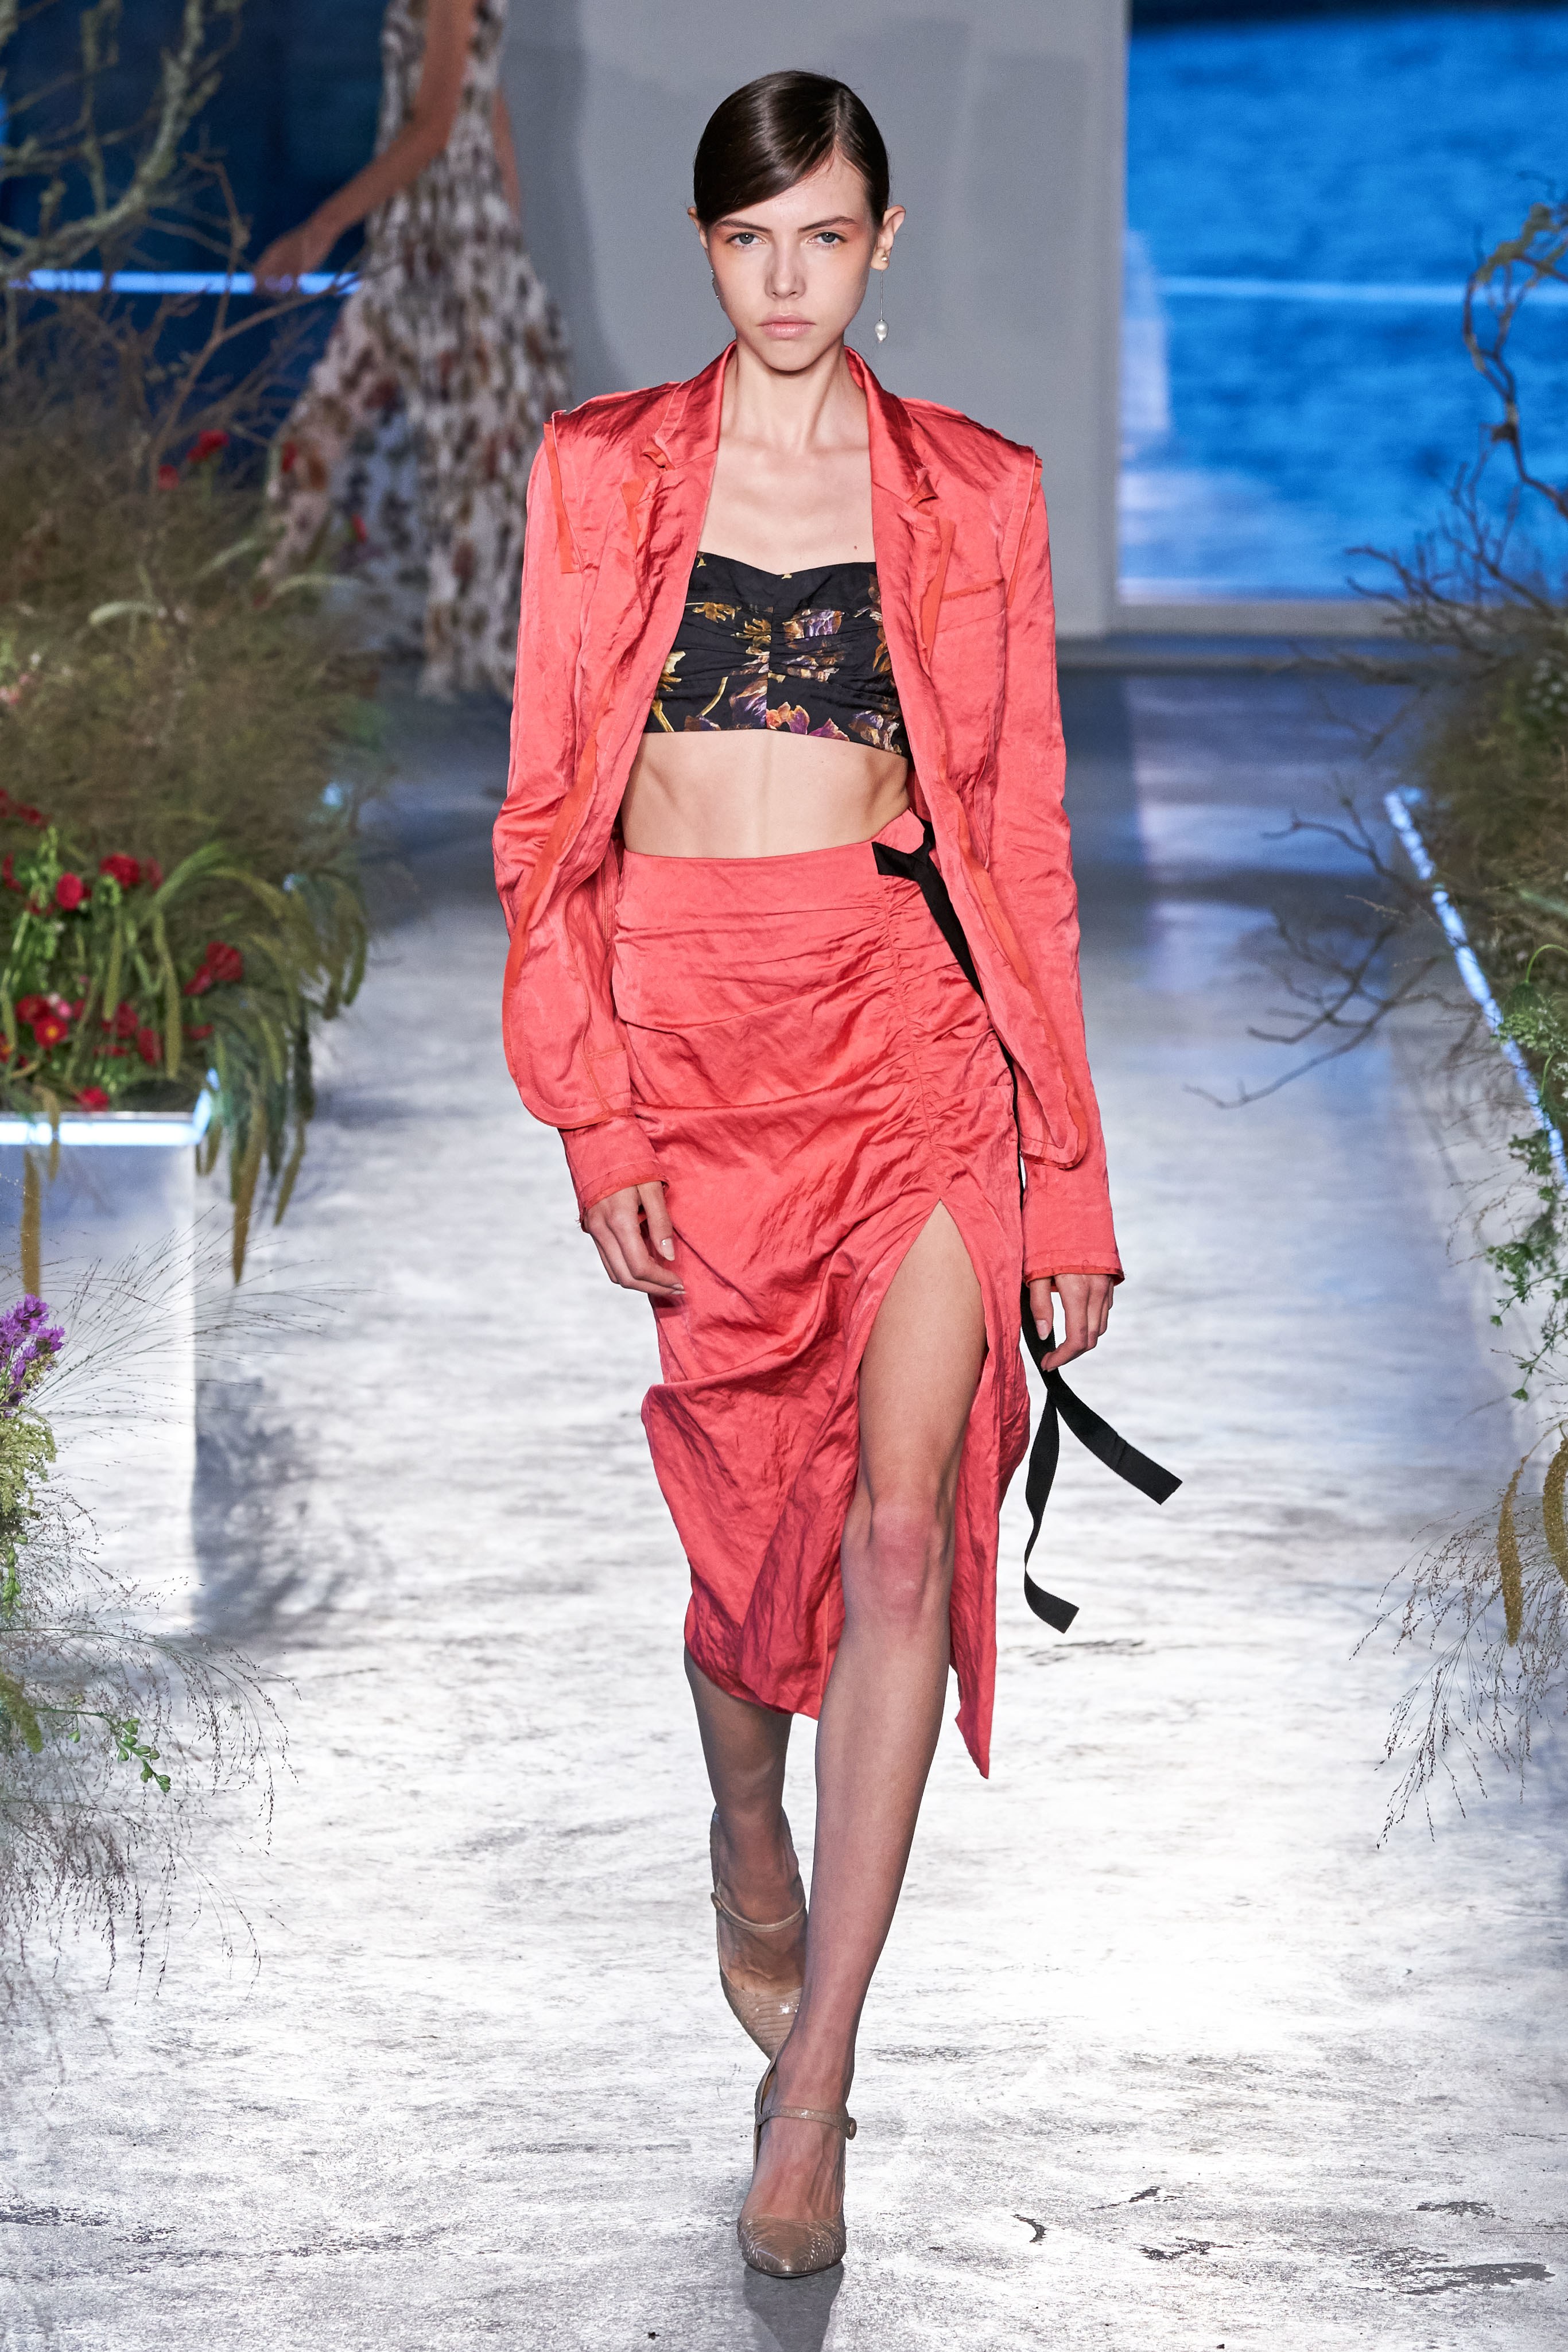 Jason Wu Spring Summer 2020 SS2020 trends runway coverage Ready To Wear Vogue bra top